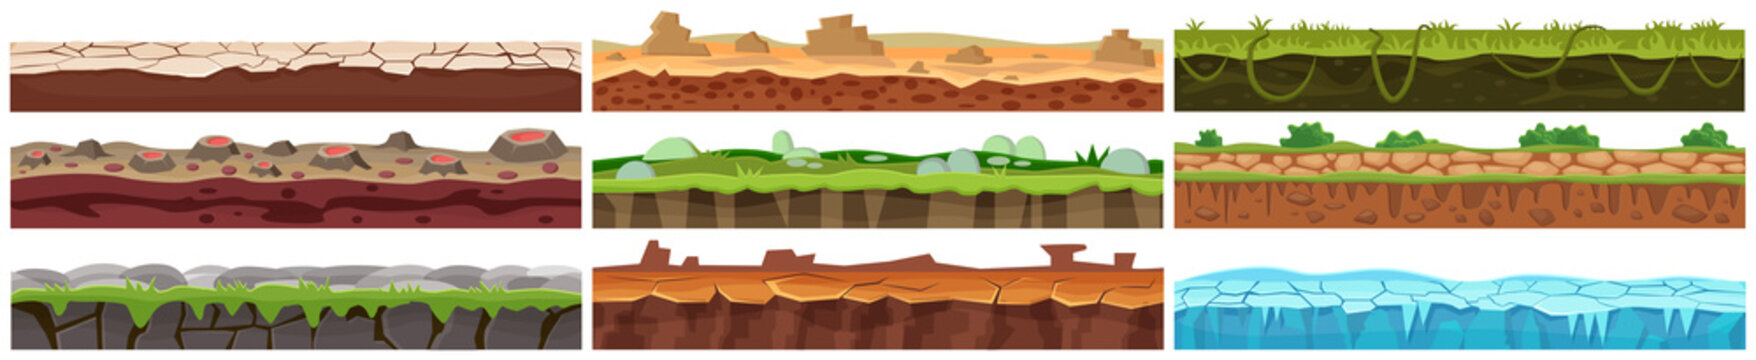 Ground level set vector illustration. Cartoon surface landscape diagram with different layers of soil and rocks, volcano, ice and green grass vegetation isolated on white. Game UI, nature concept